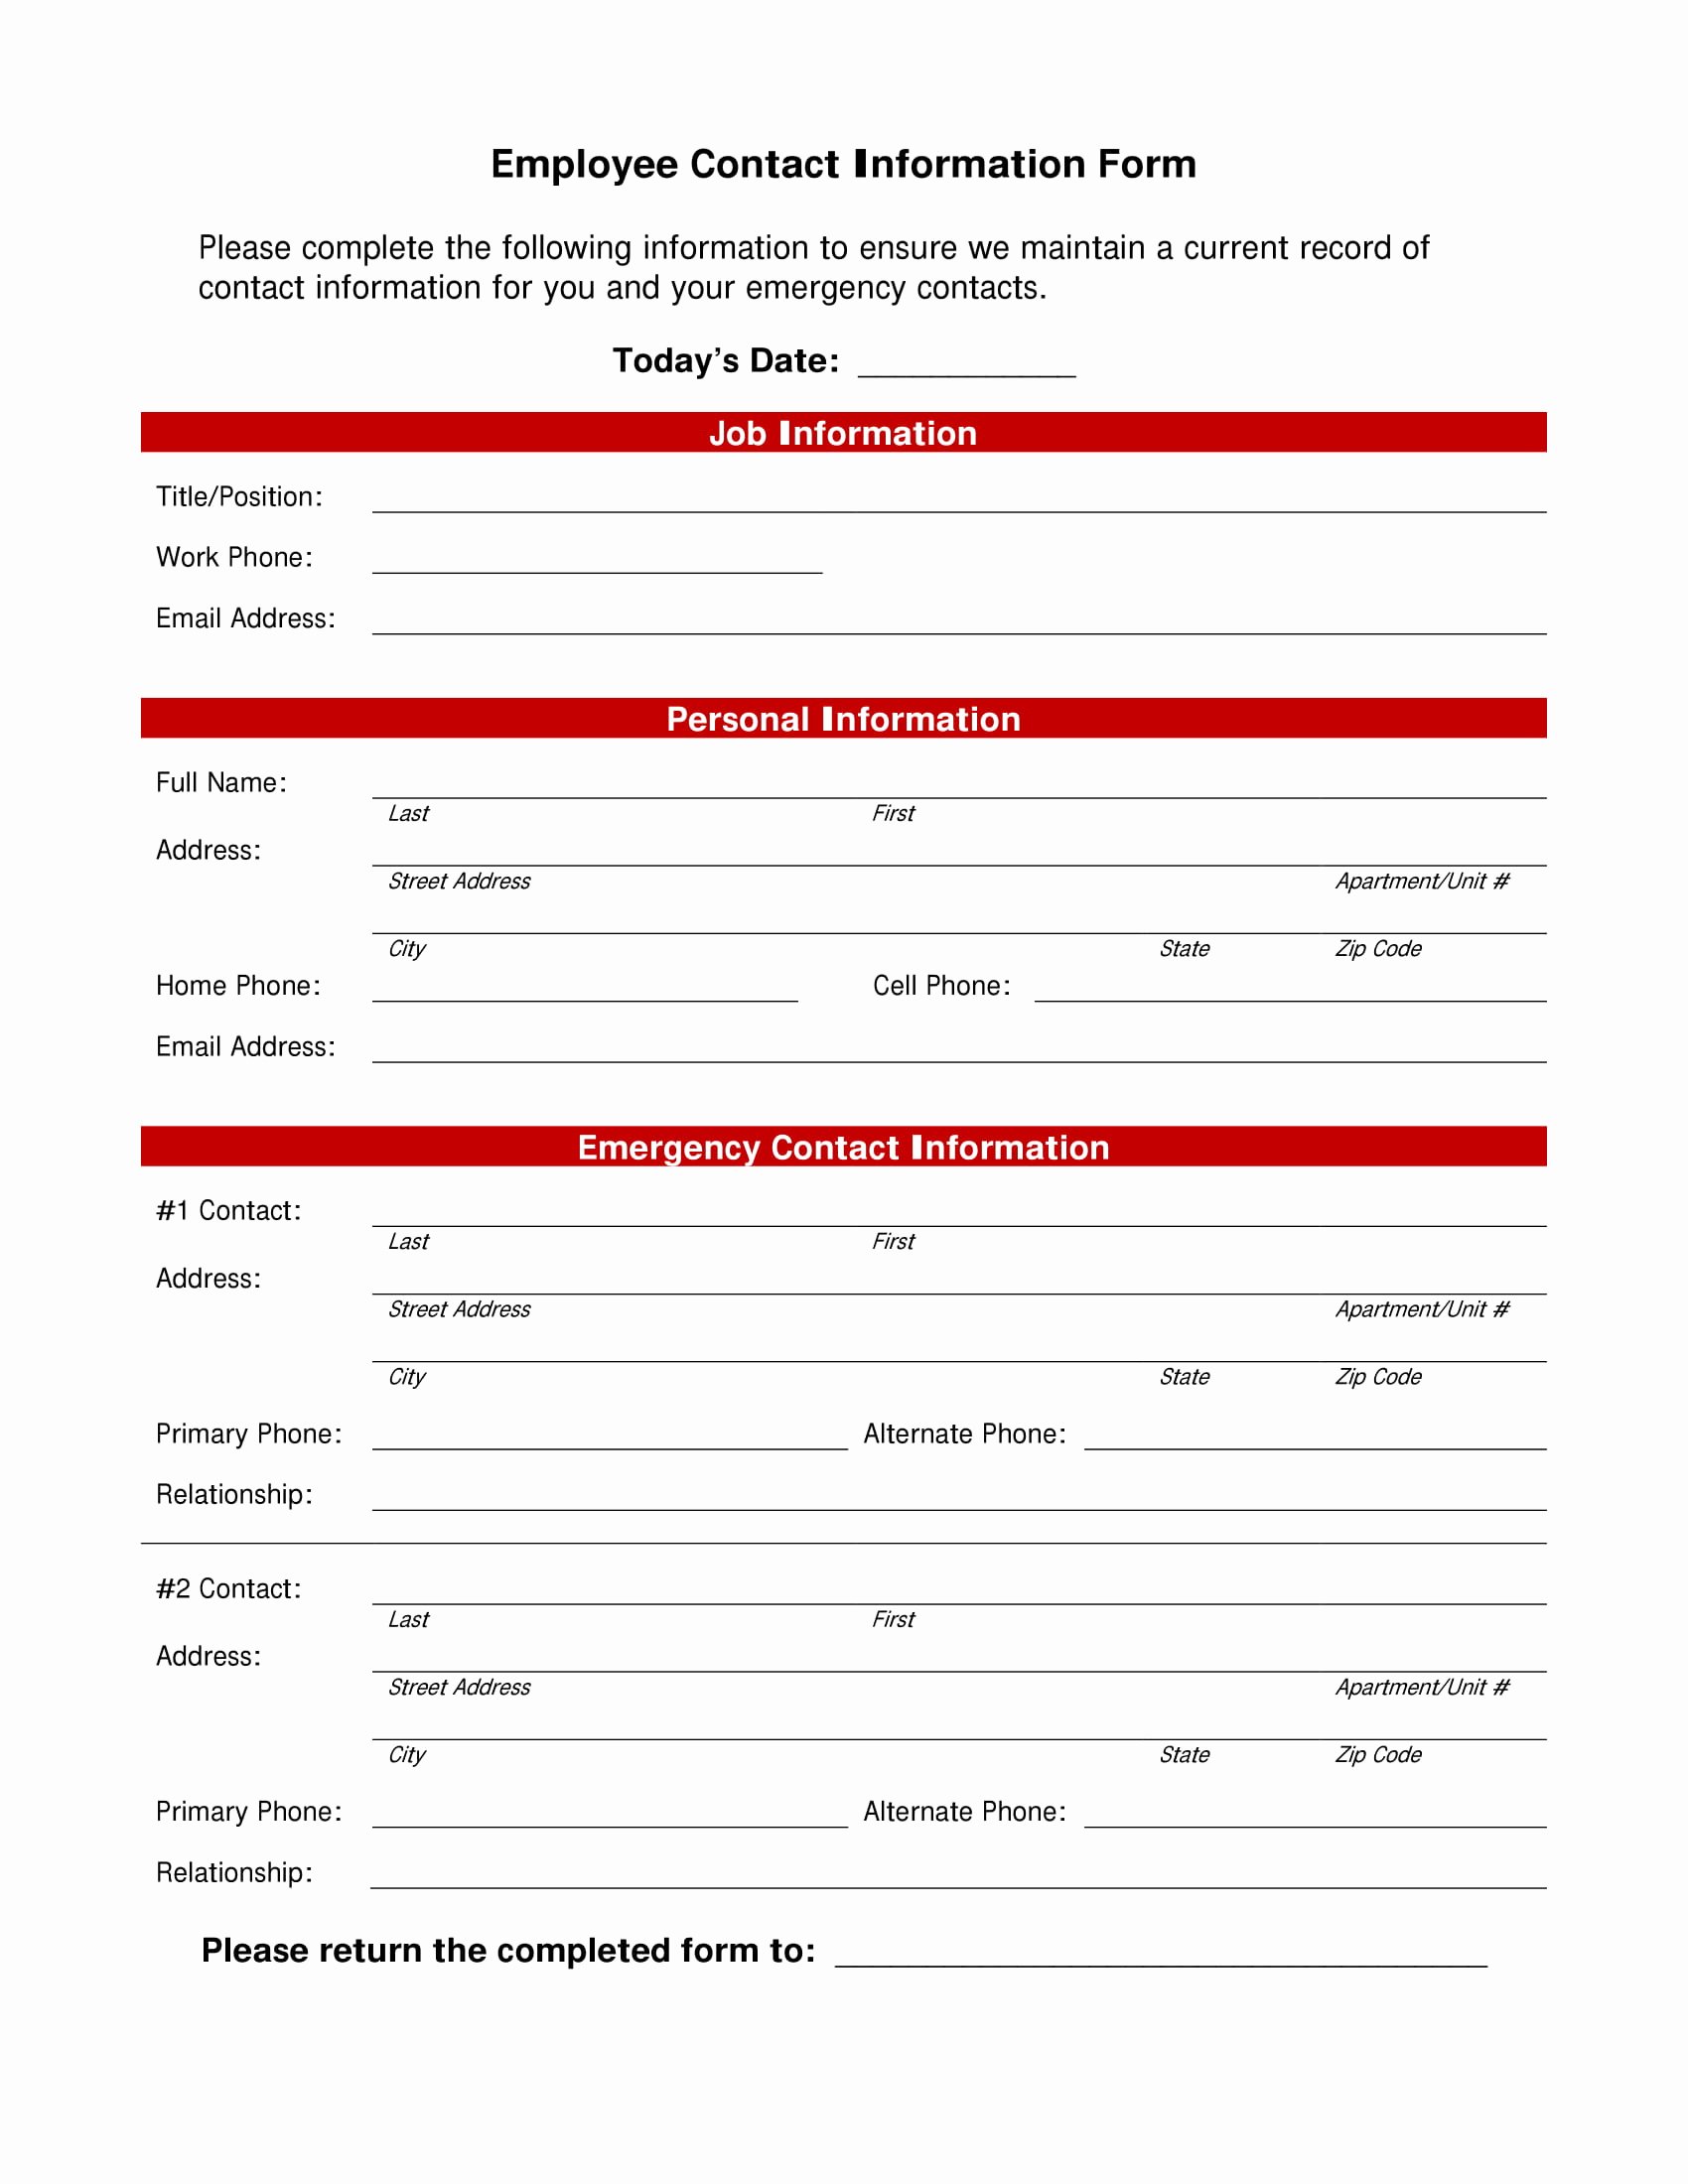 Employee Directory Template Lovely 10 Employee Information form Examples Pdf